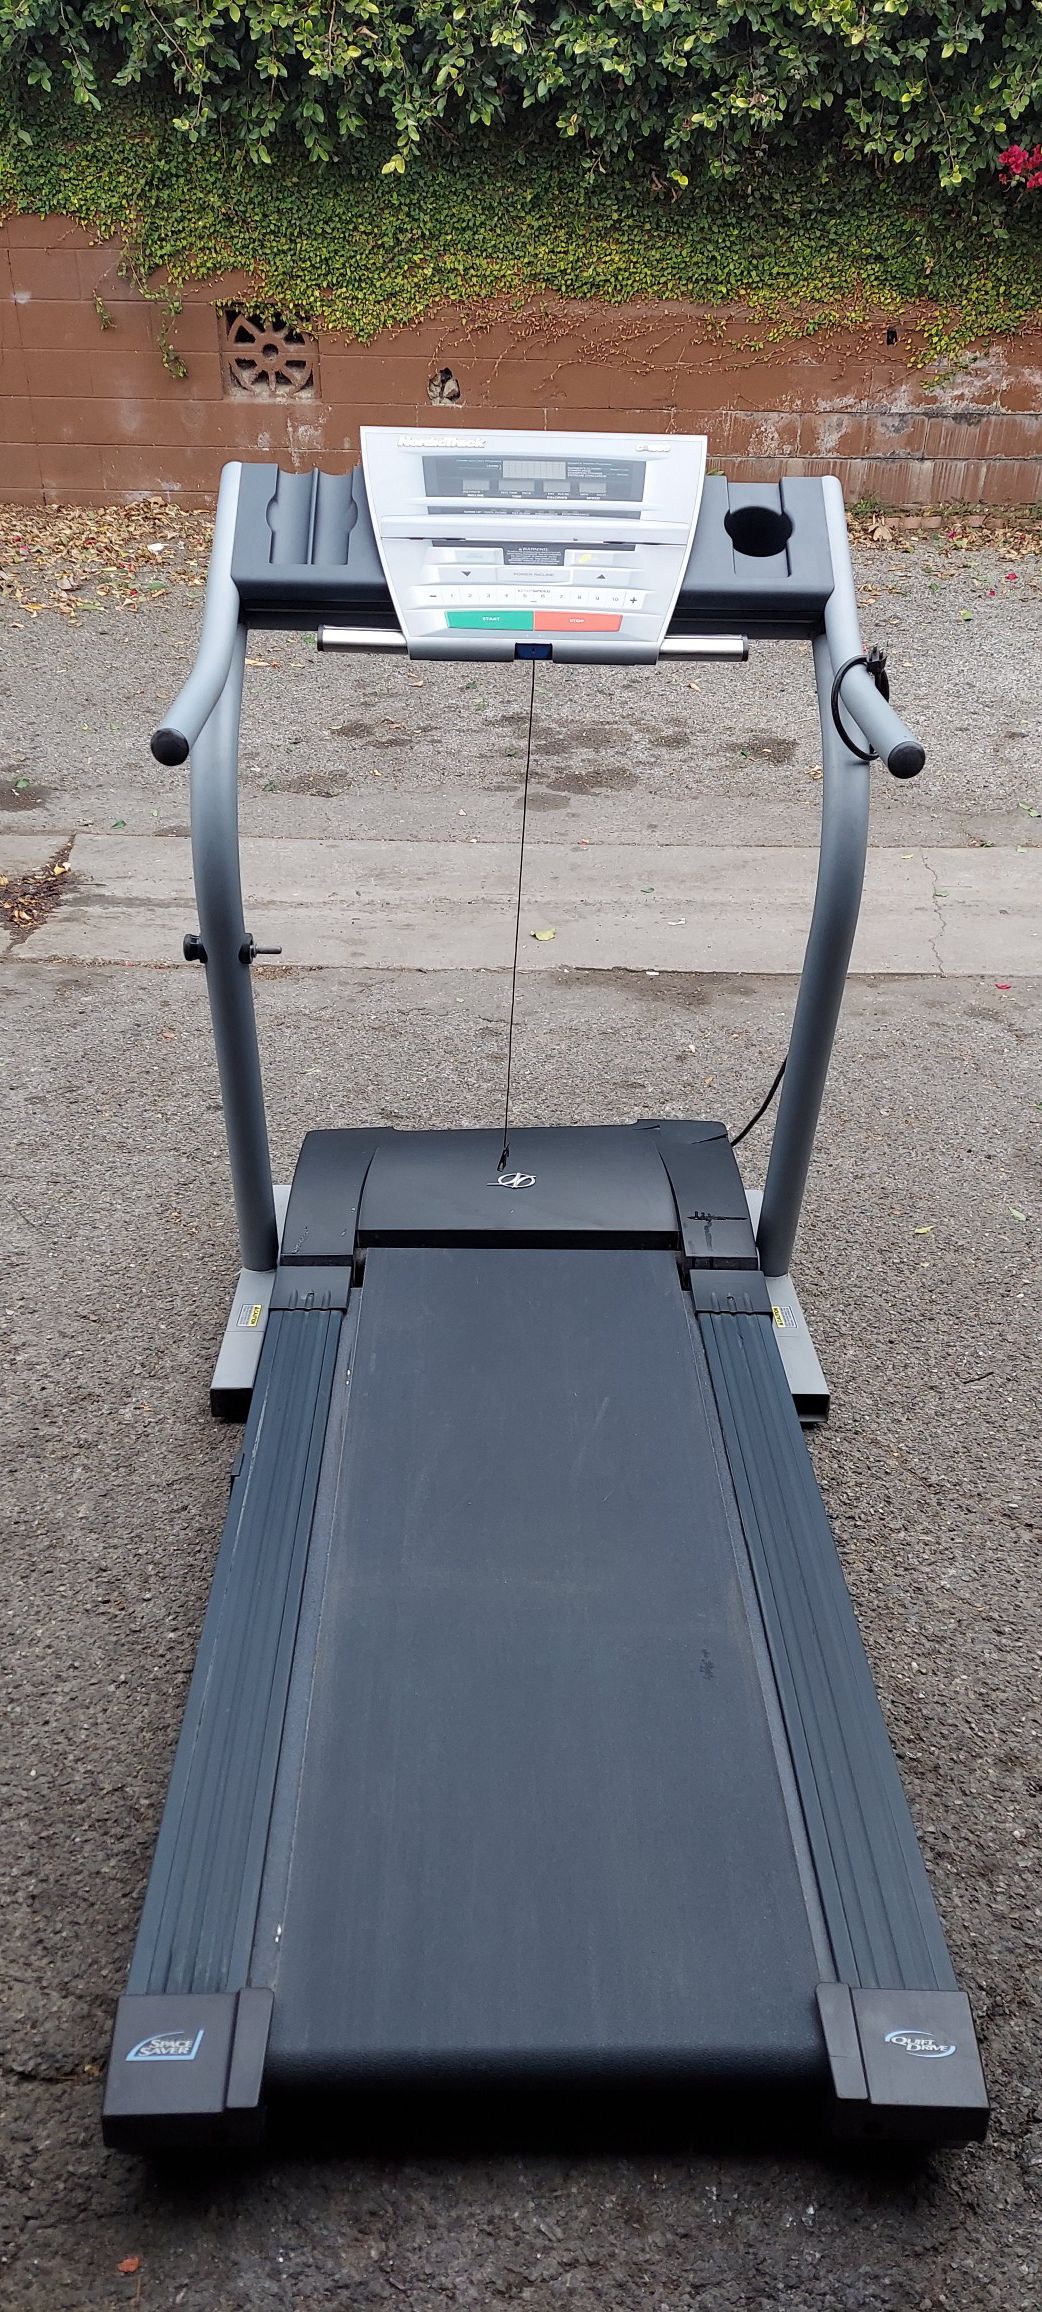 Nordictrack c1800 Foldable Treadmill with Incline